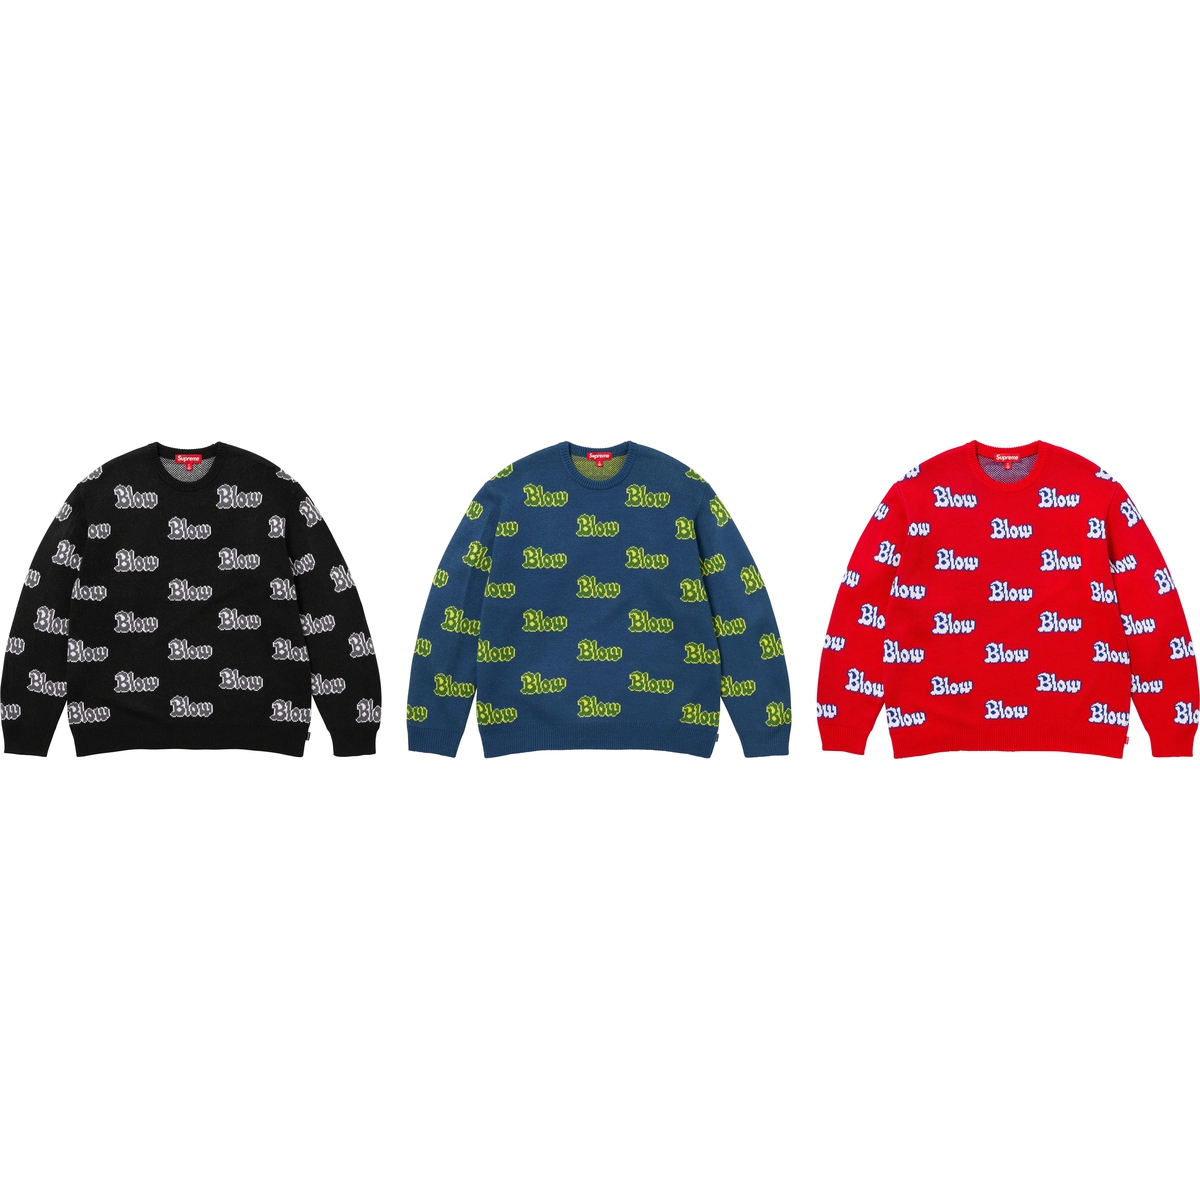 Supreme Blow Sweater releasing on Week 14 for fall winter 2023